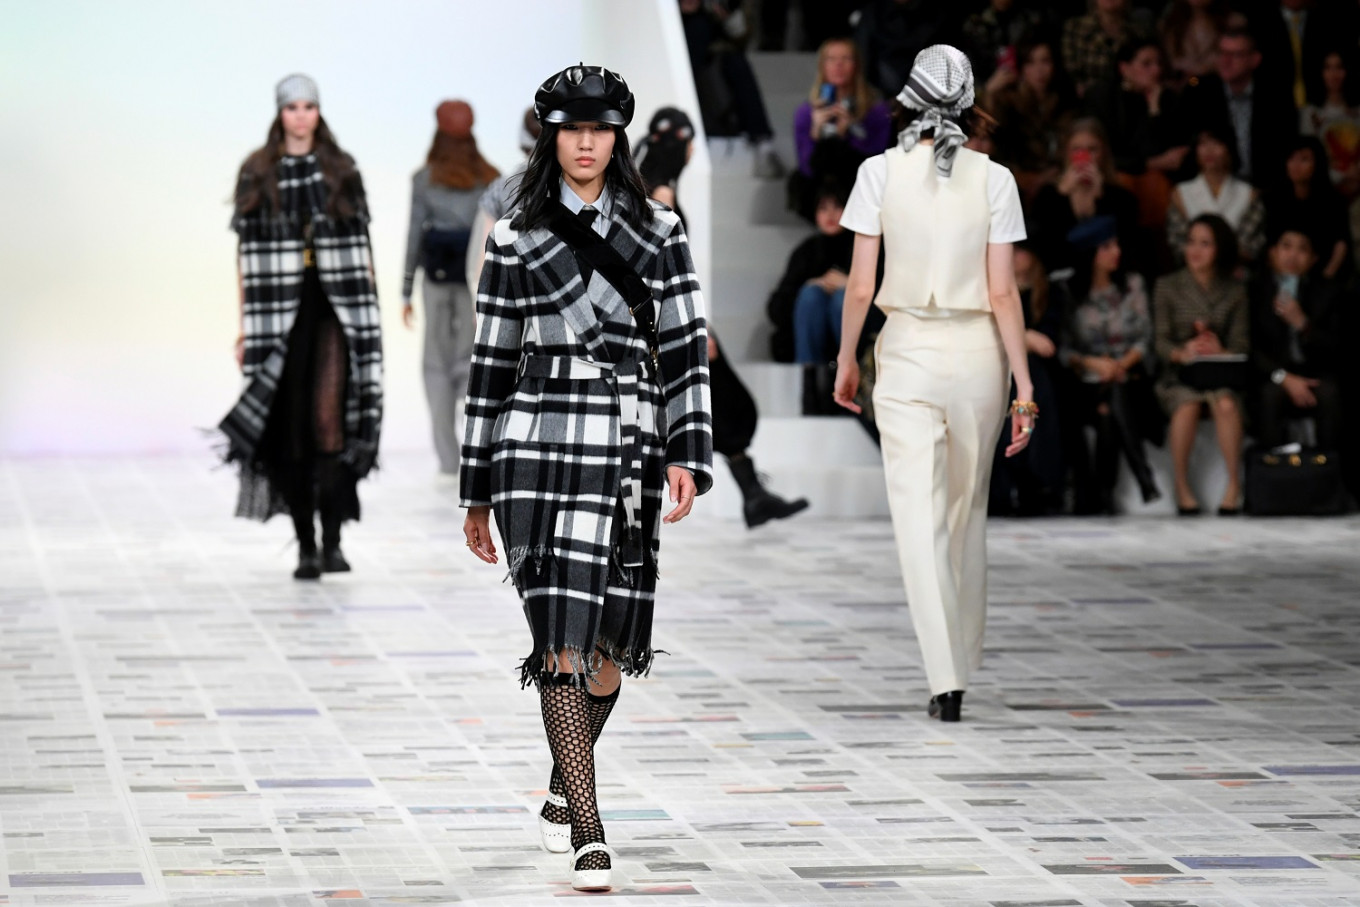 Dior plays with 1970s influences at Paris Fashion Week - Lifestyle ...